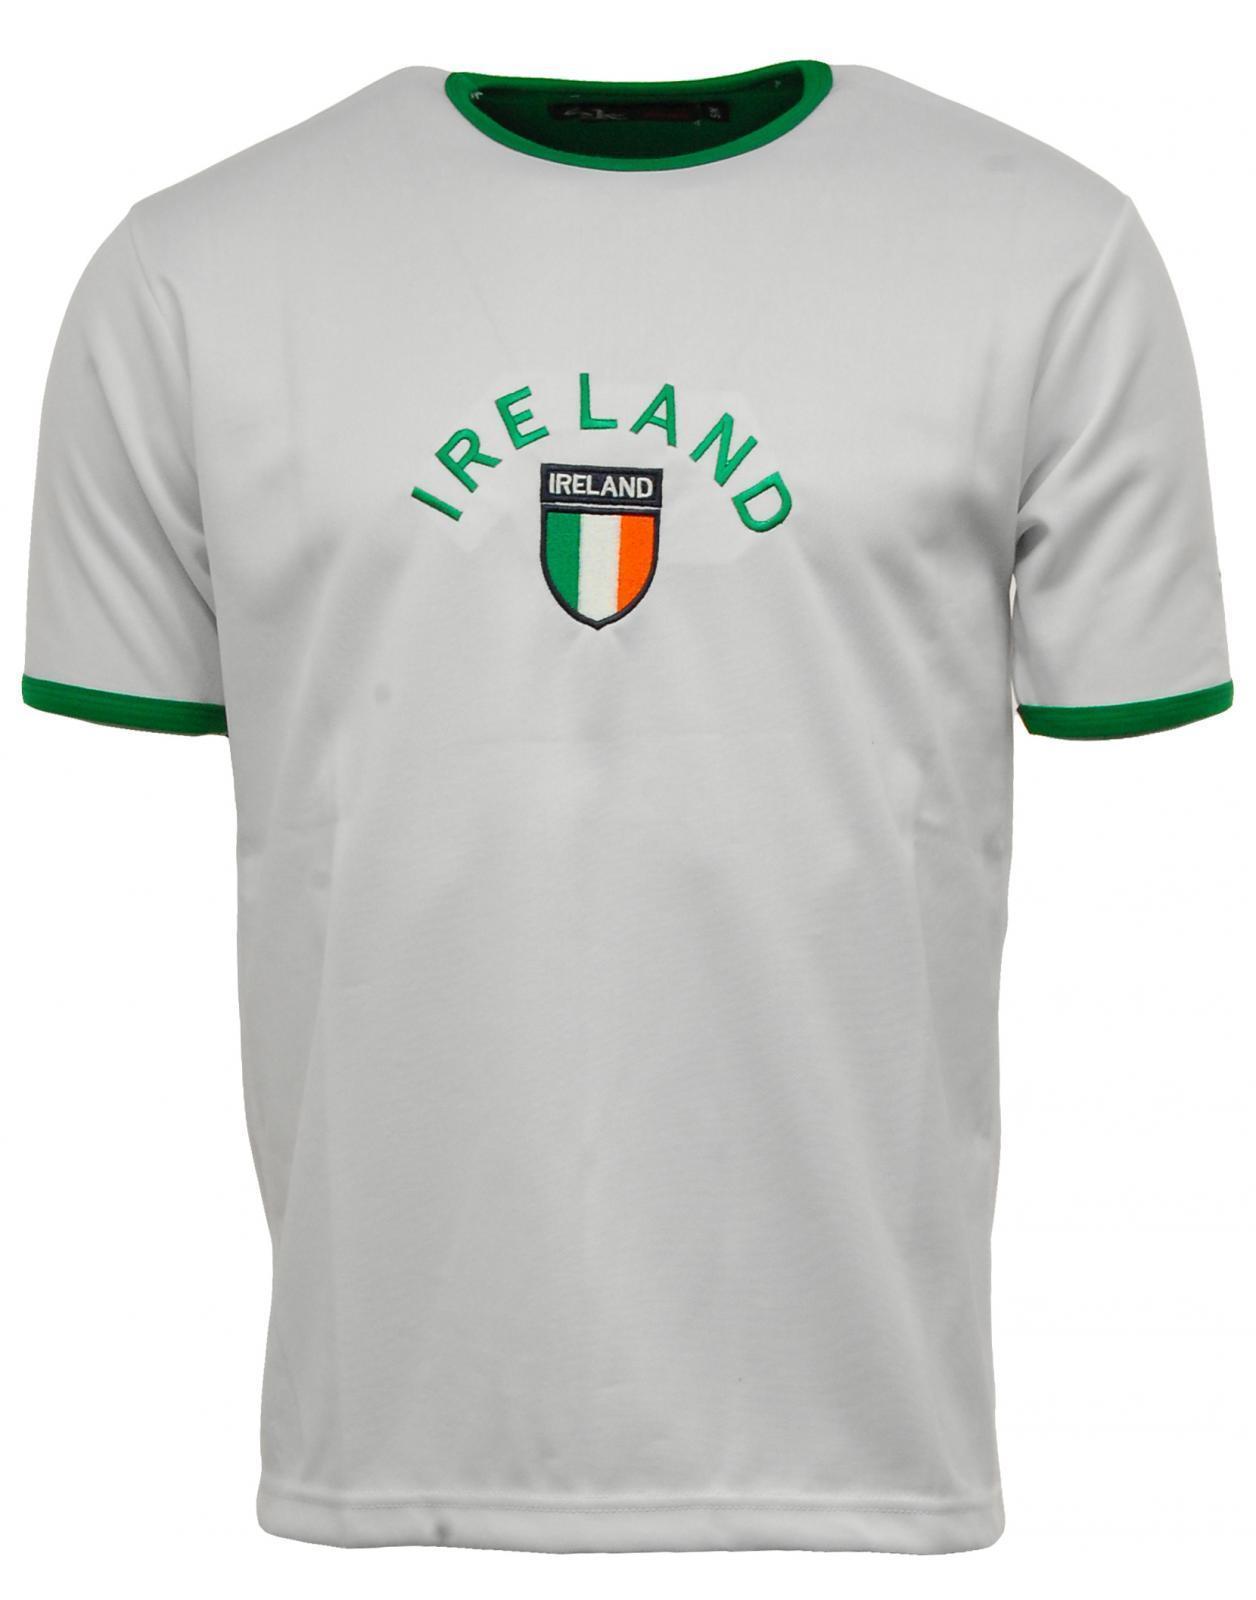 NEW IRELAND EIRE T-SHIRT TOP 2XL FOOTBALL RUGBY SPORTS* S